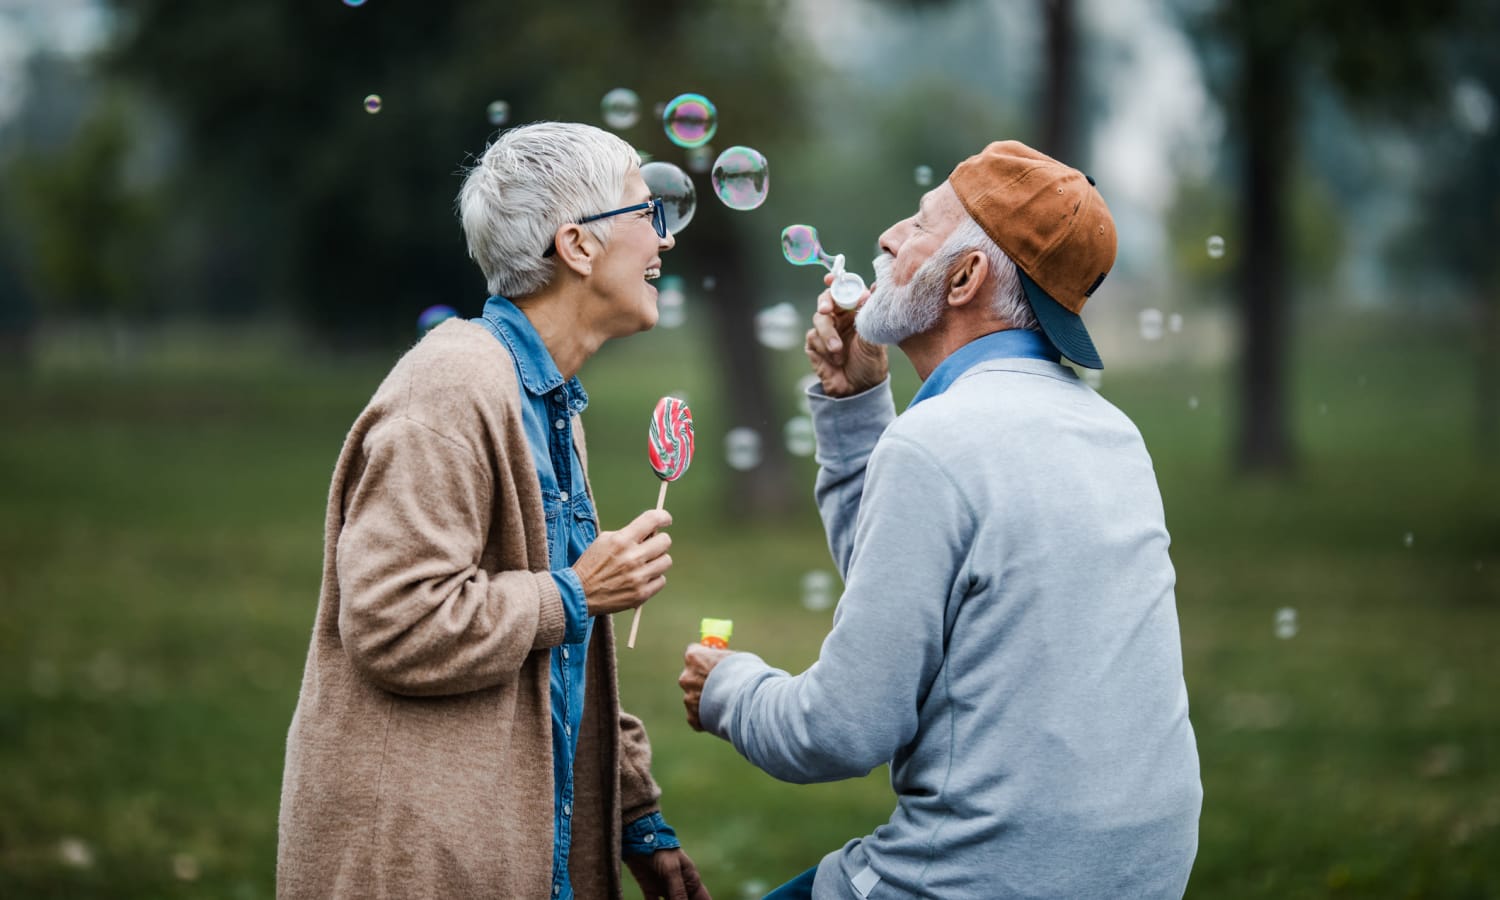 Residents blowing bubbles at Emerald Gardens in Woodburn, Oregon